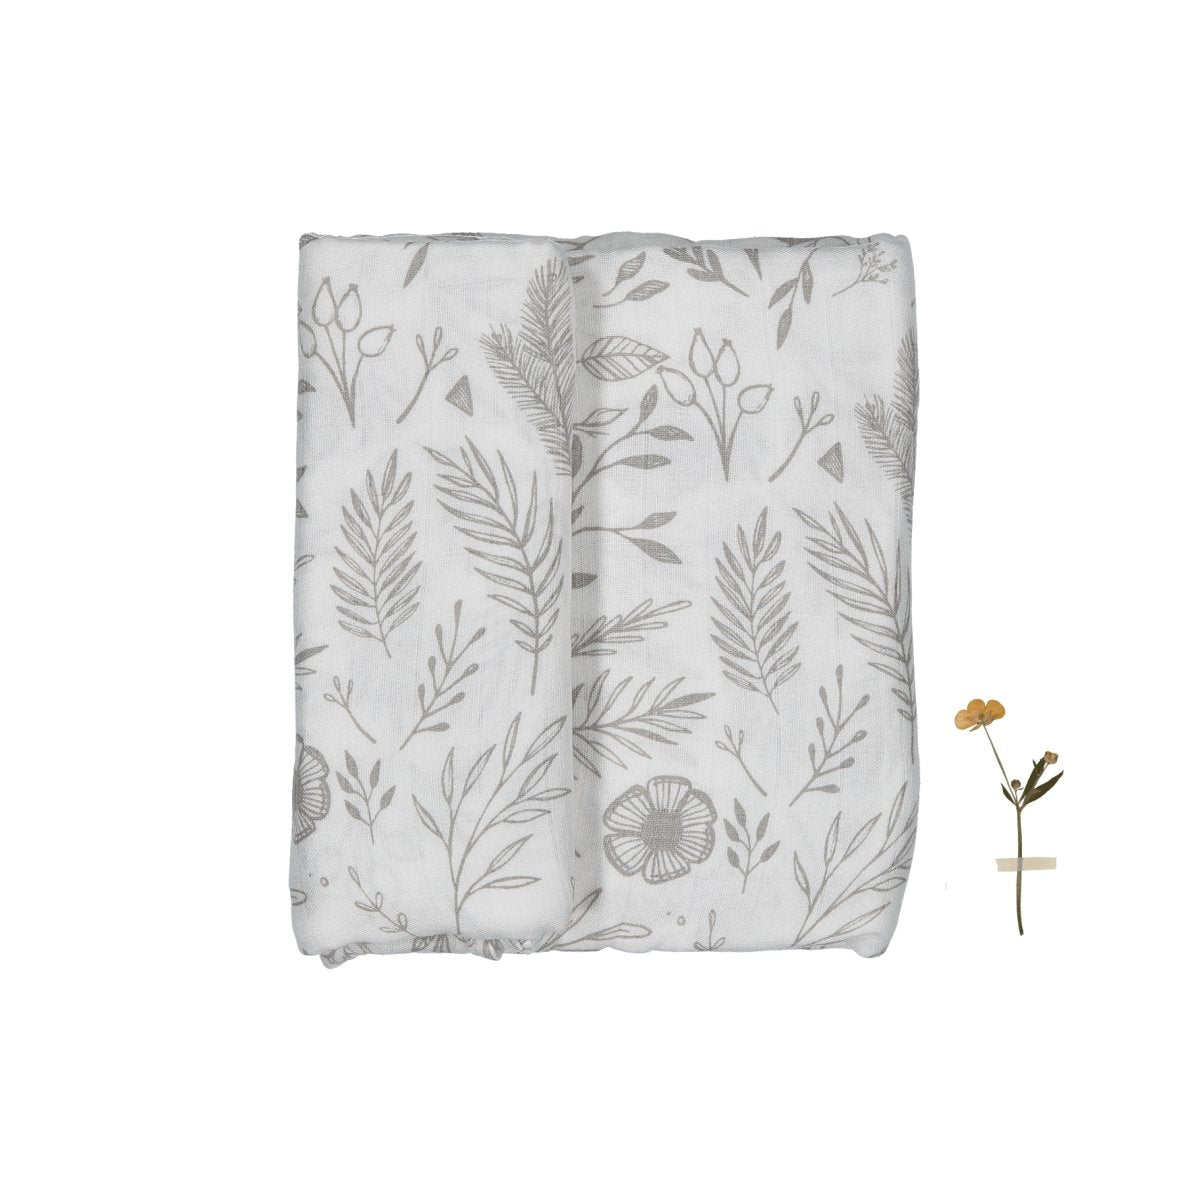 The Bamboo/Cotton Muslin Swaddle Blanket